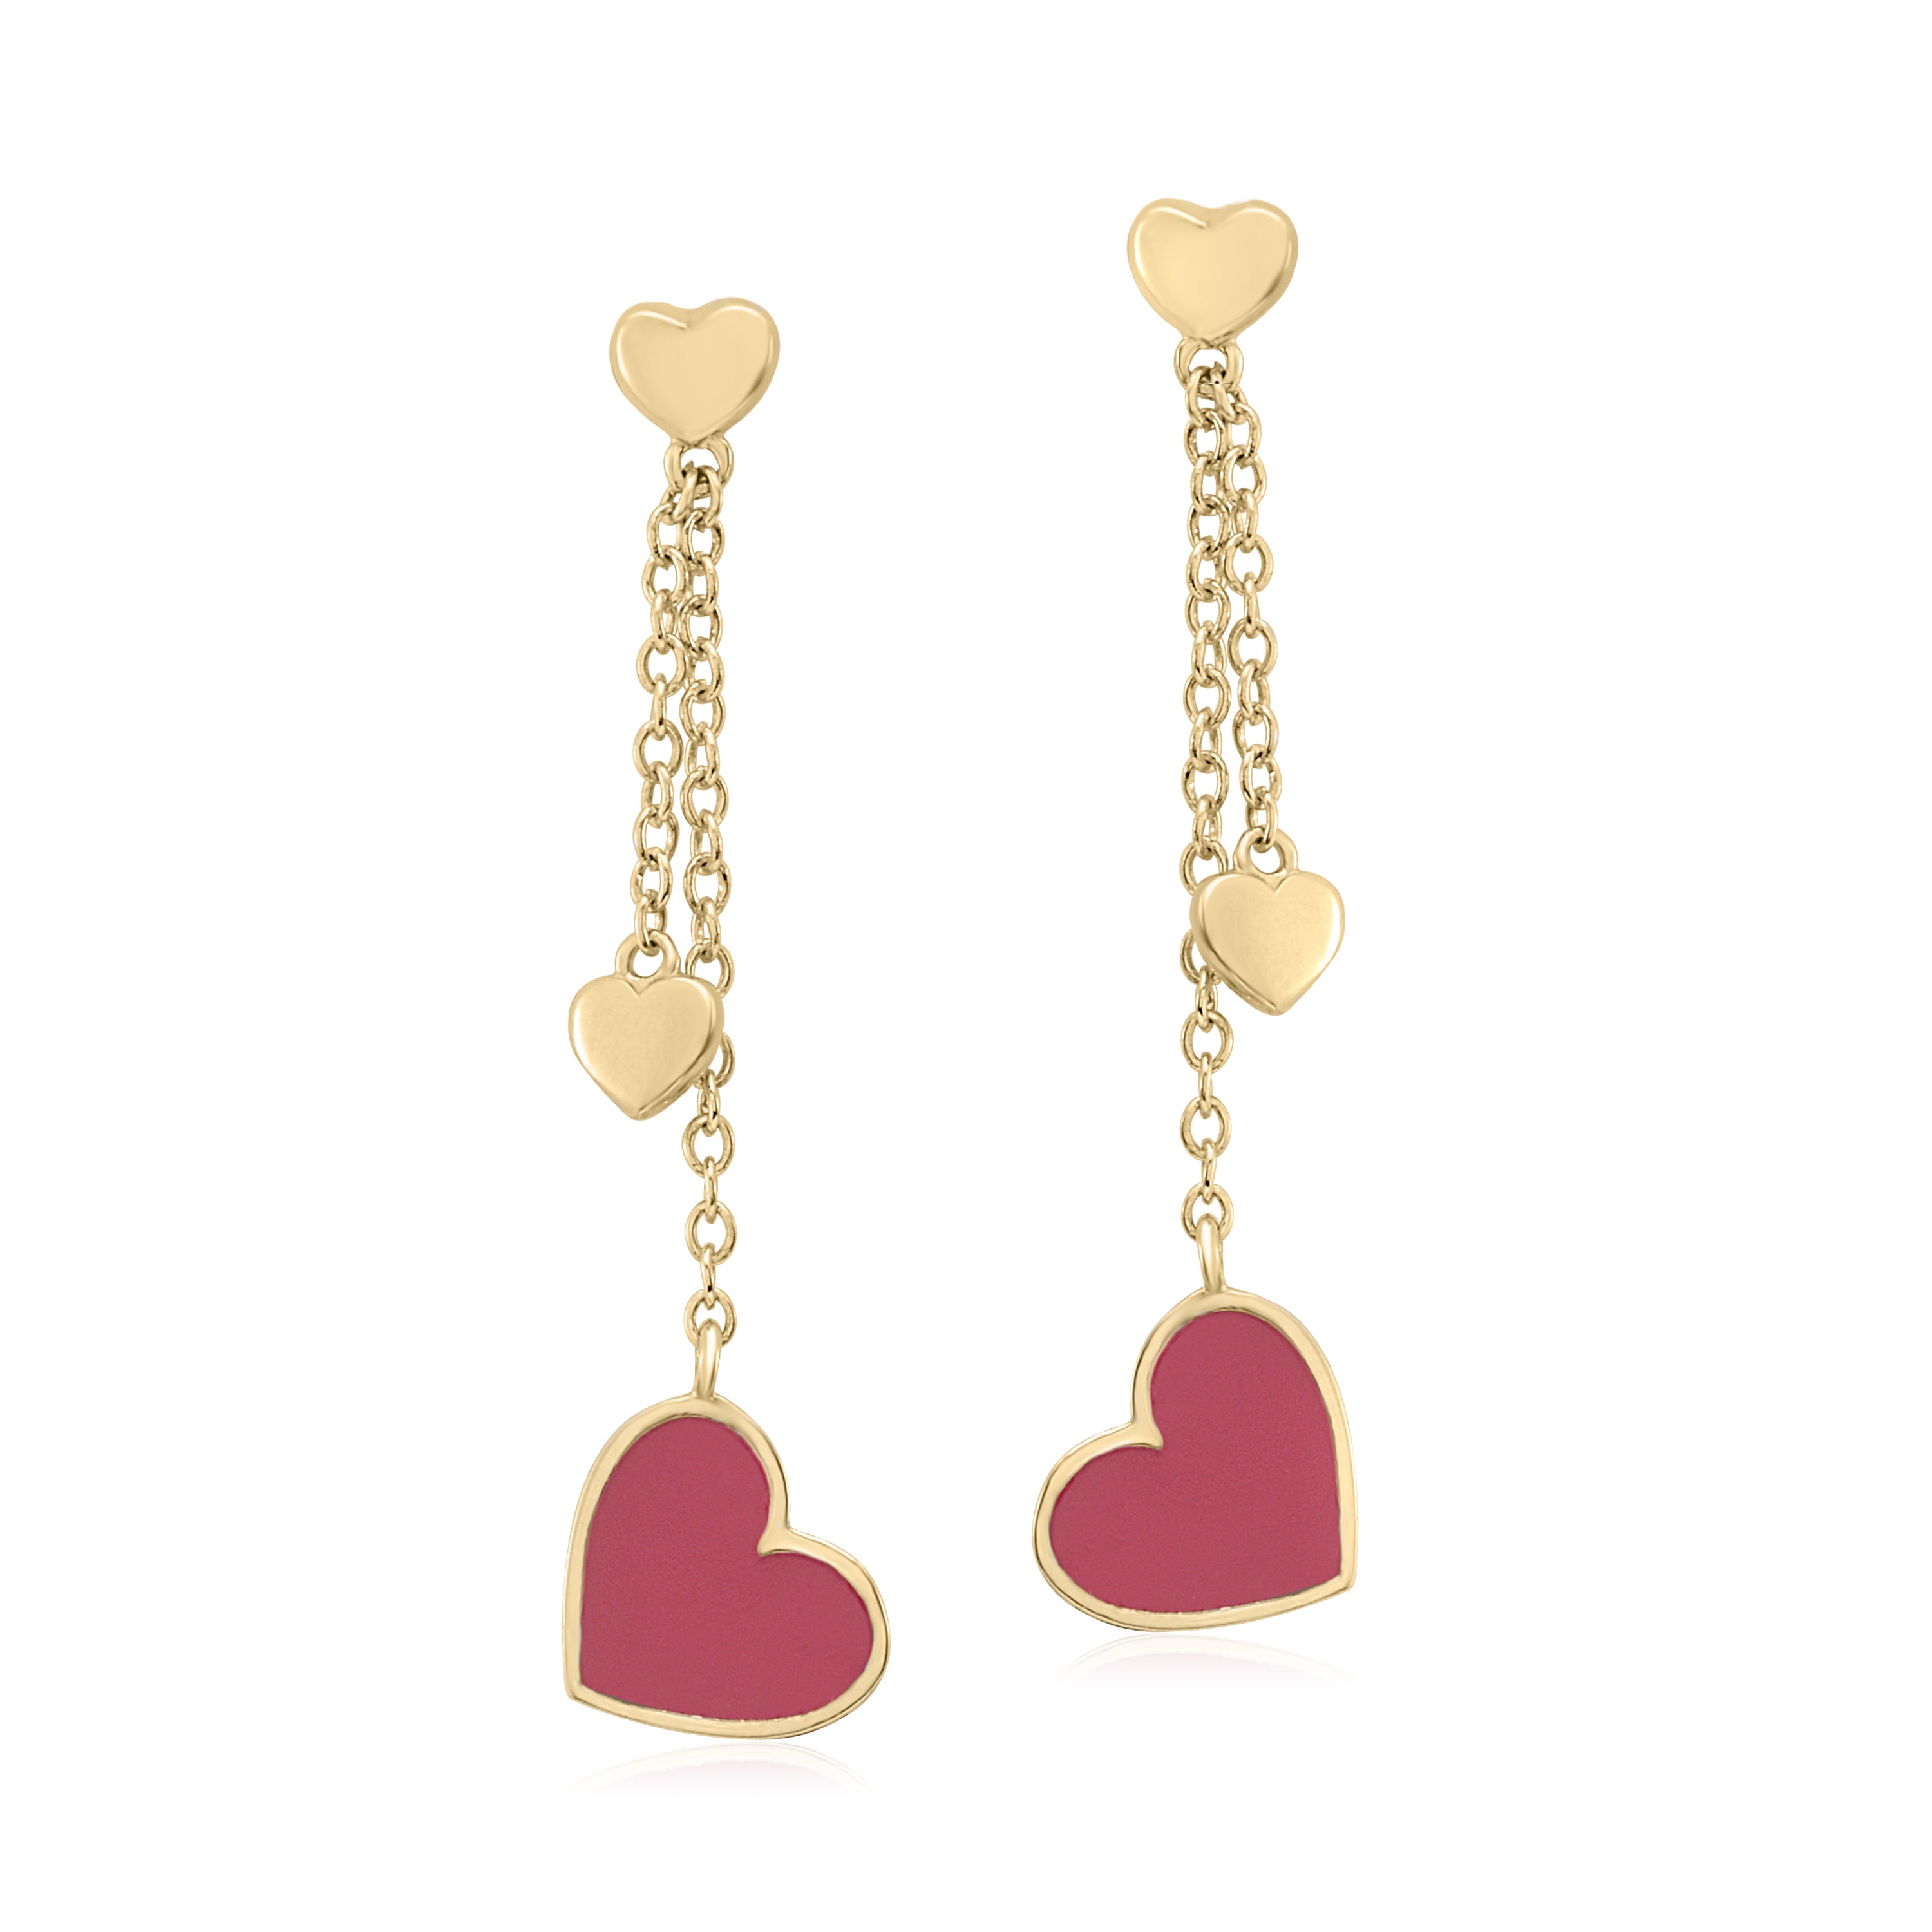 UNICORNJ 14K Yellow Gold Long Double Dangle Drop Heart Earrings with Pink or Red Enamel Italy